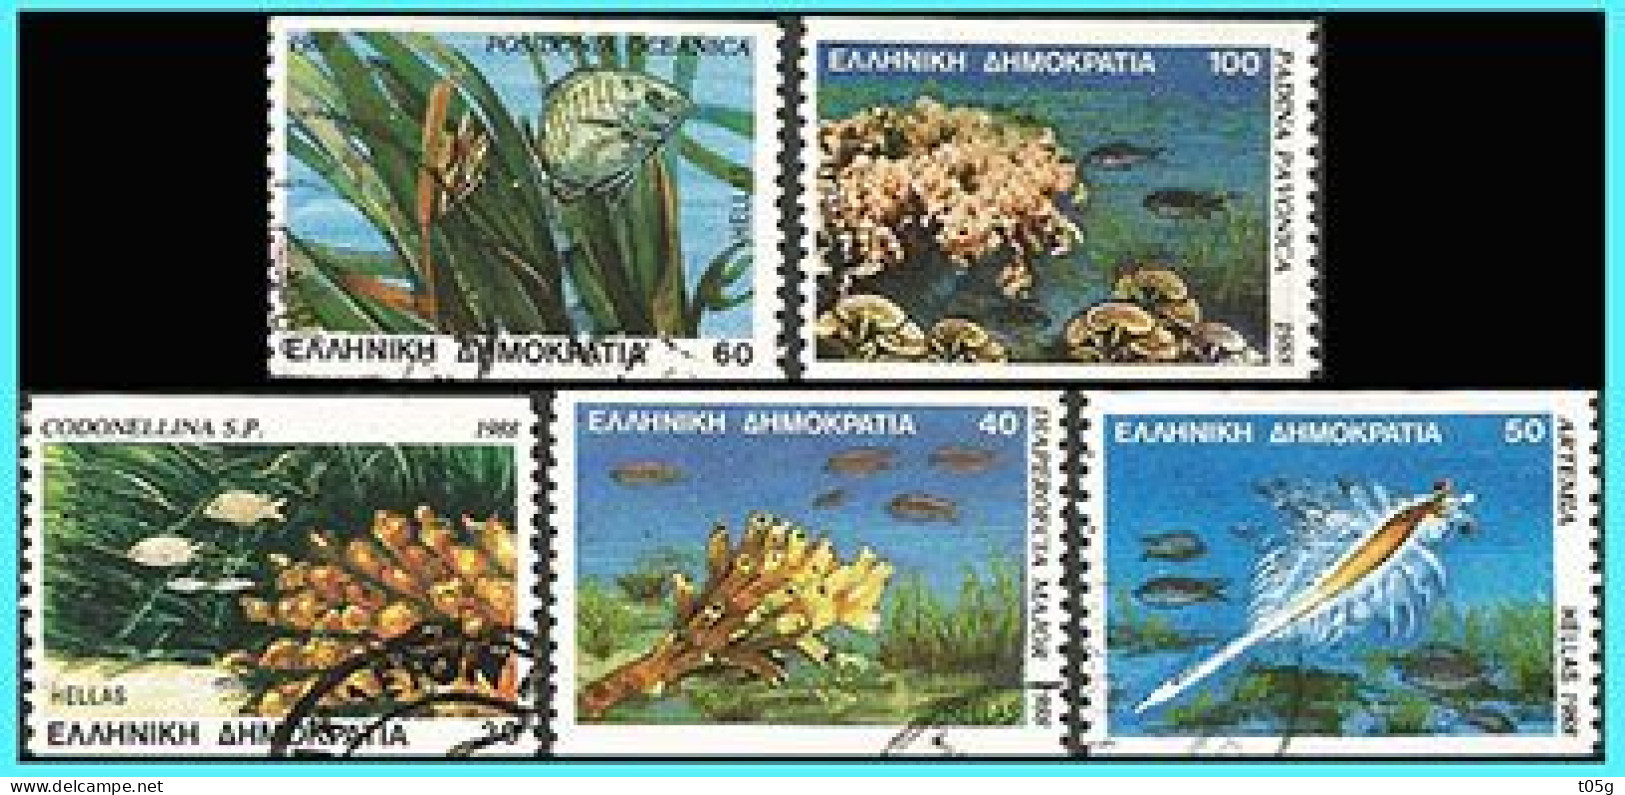 GREECE- GRECE - HELLAS 1988:  Microscopic Animal The Greek Seas - Horizontally Imperforate- Compl Set Used - Used Stamps